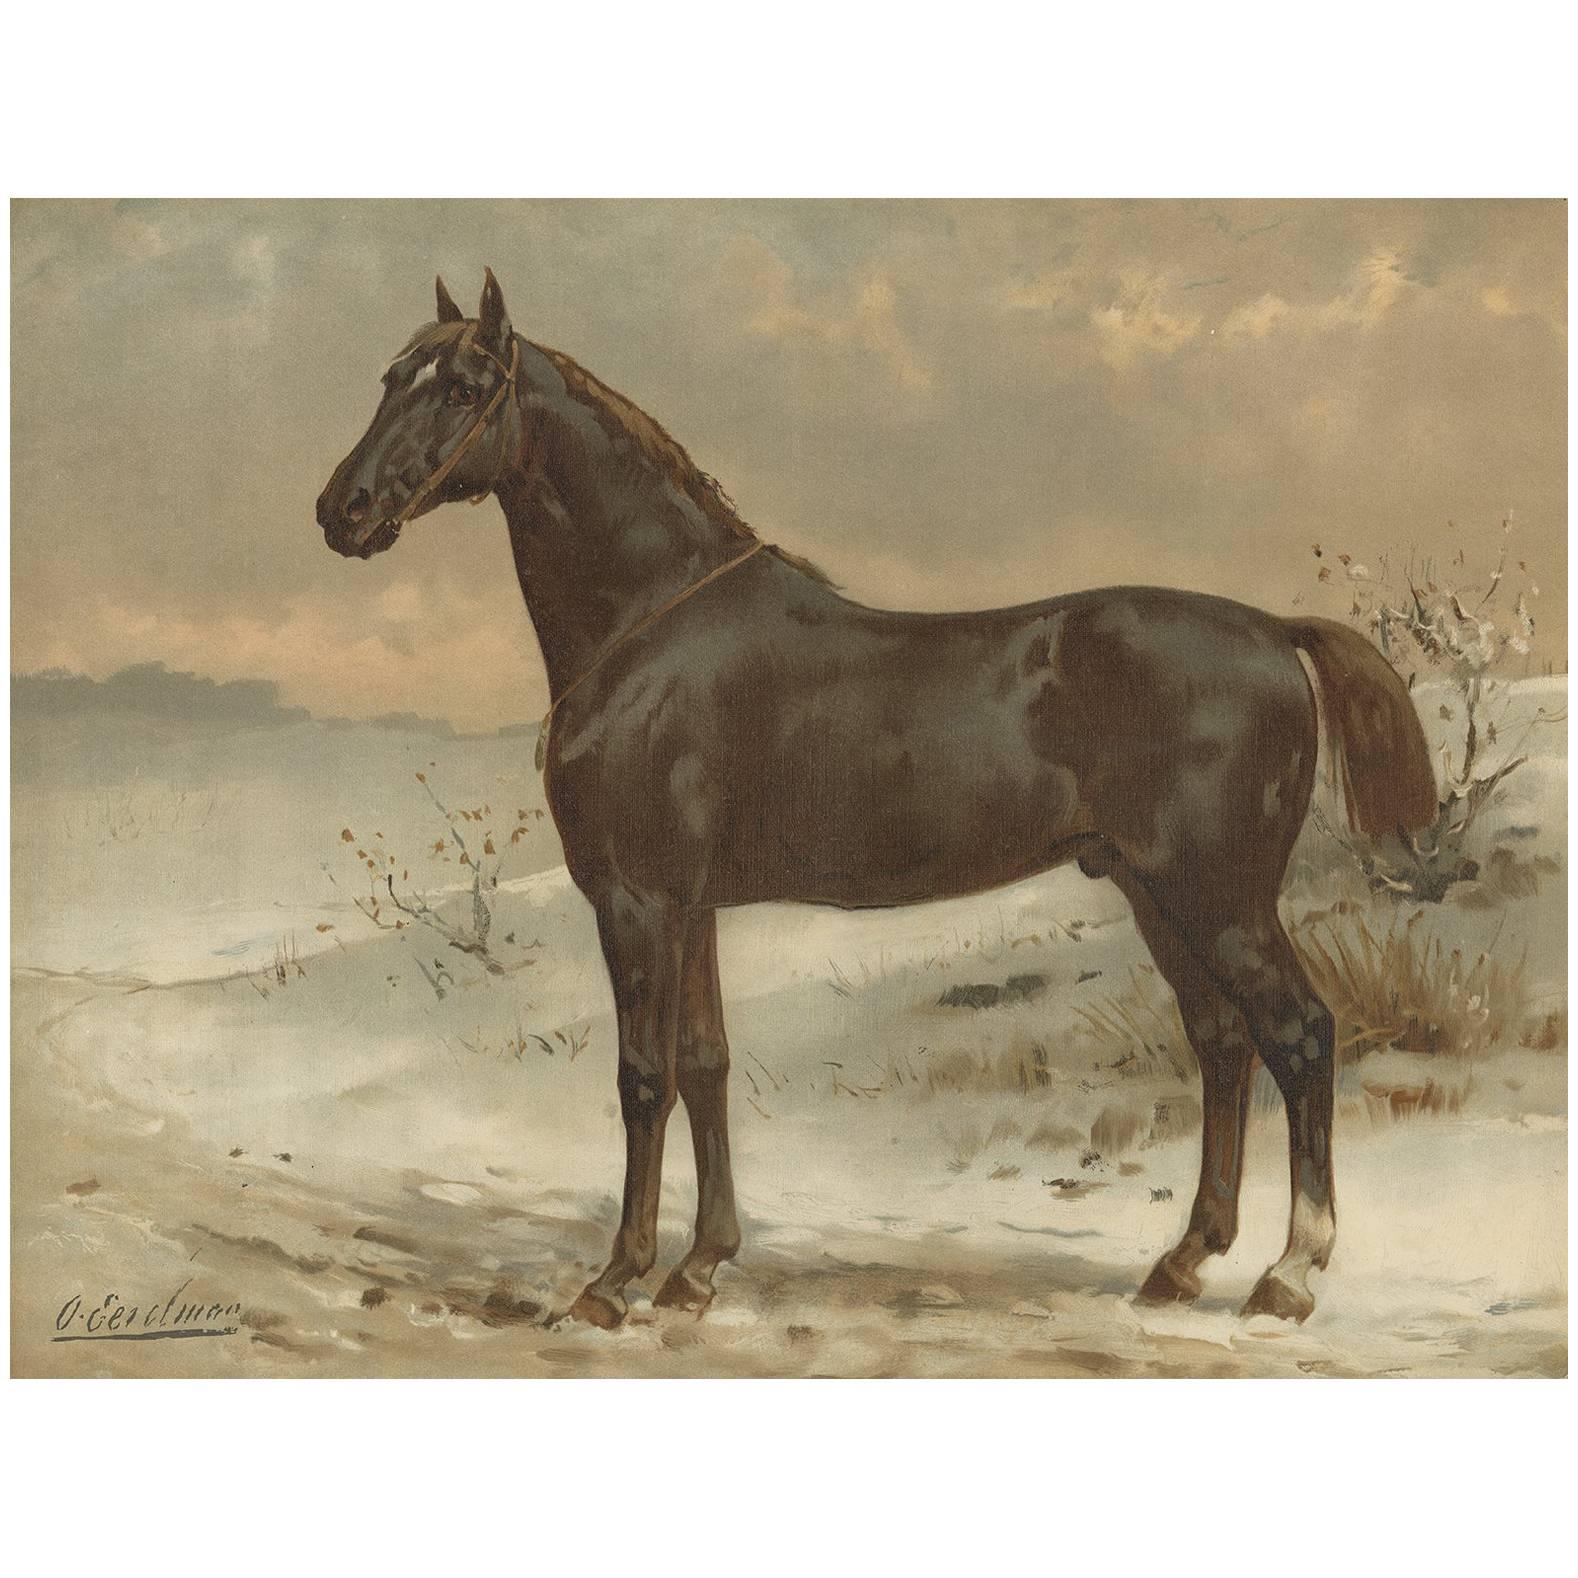 Antique Print of the Russian Half-Blood Horse by O. Eerelman, 1898